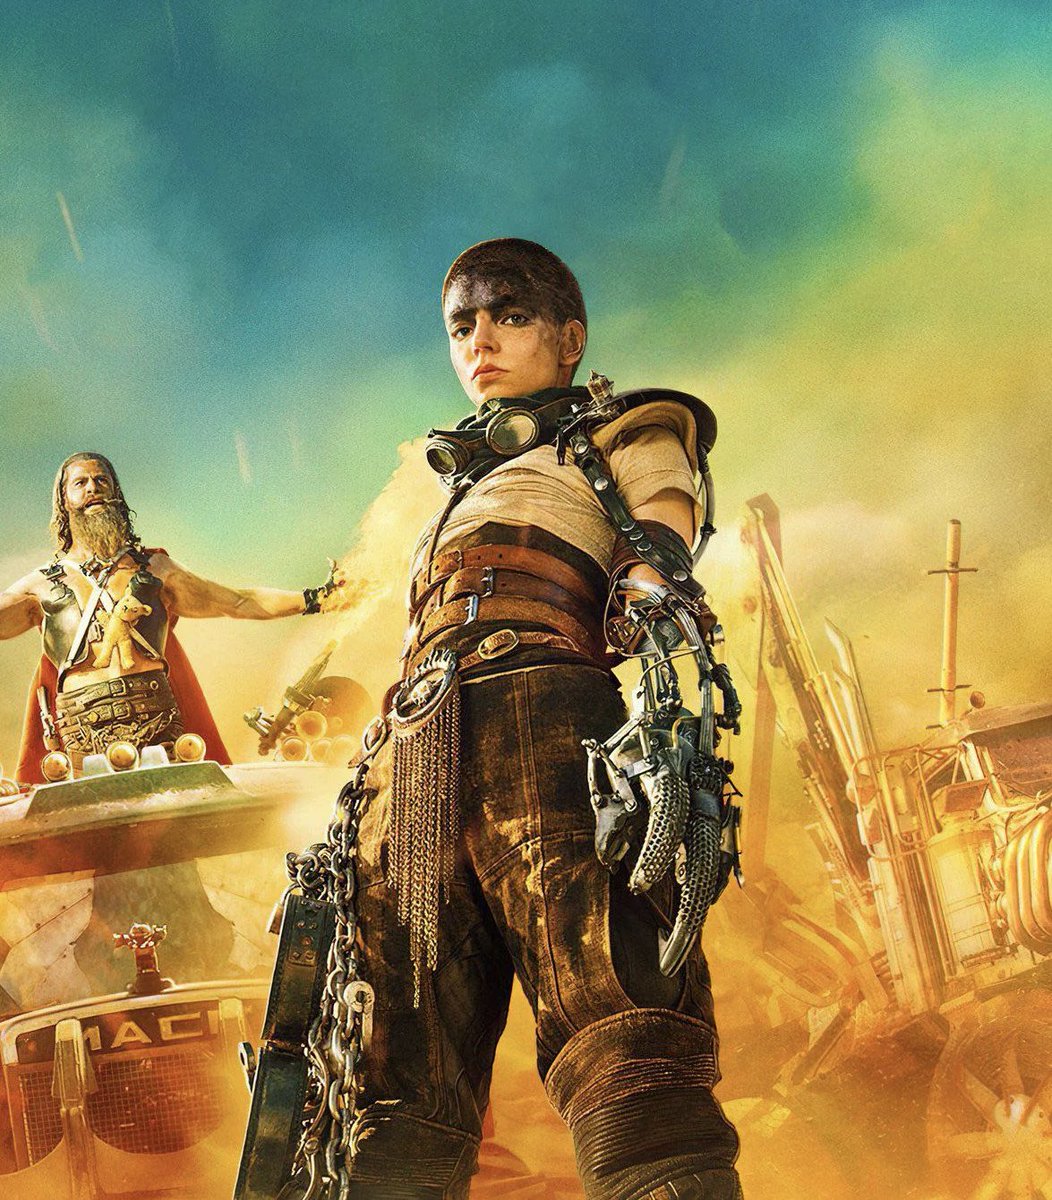 ‘FURIOSA’ debuts with 90% on Rotten Tomatoes. • Described as one of the best prequels ever made & a bold masterpiece • A fierce & gripping performance from Anya Taylor-Joy. • Just got a 7-min standing ovation at Cannes.